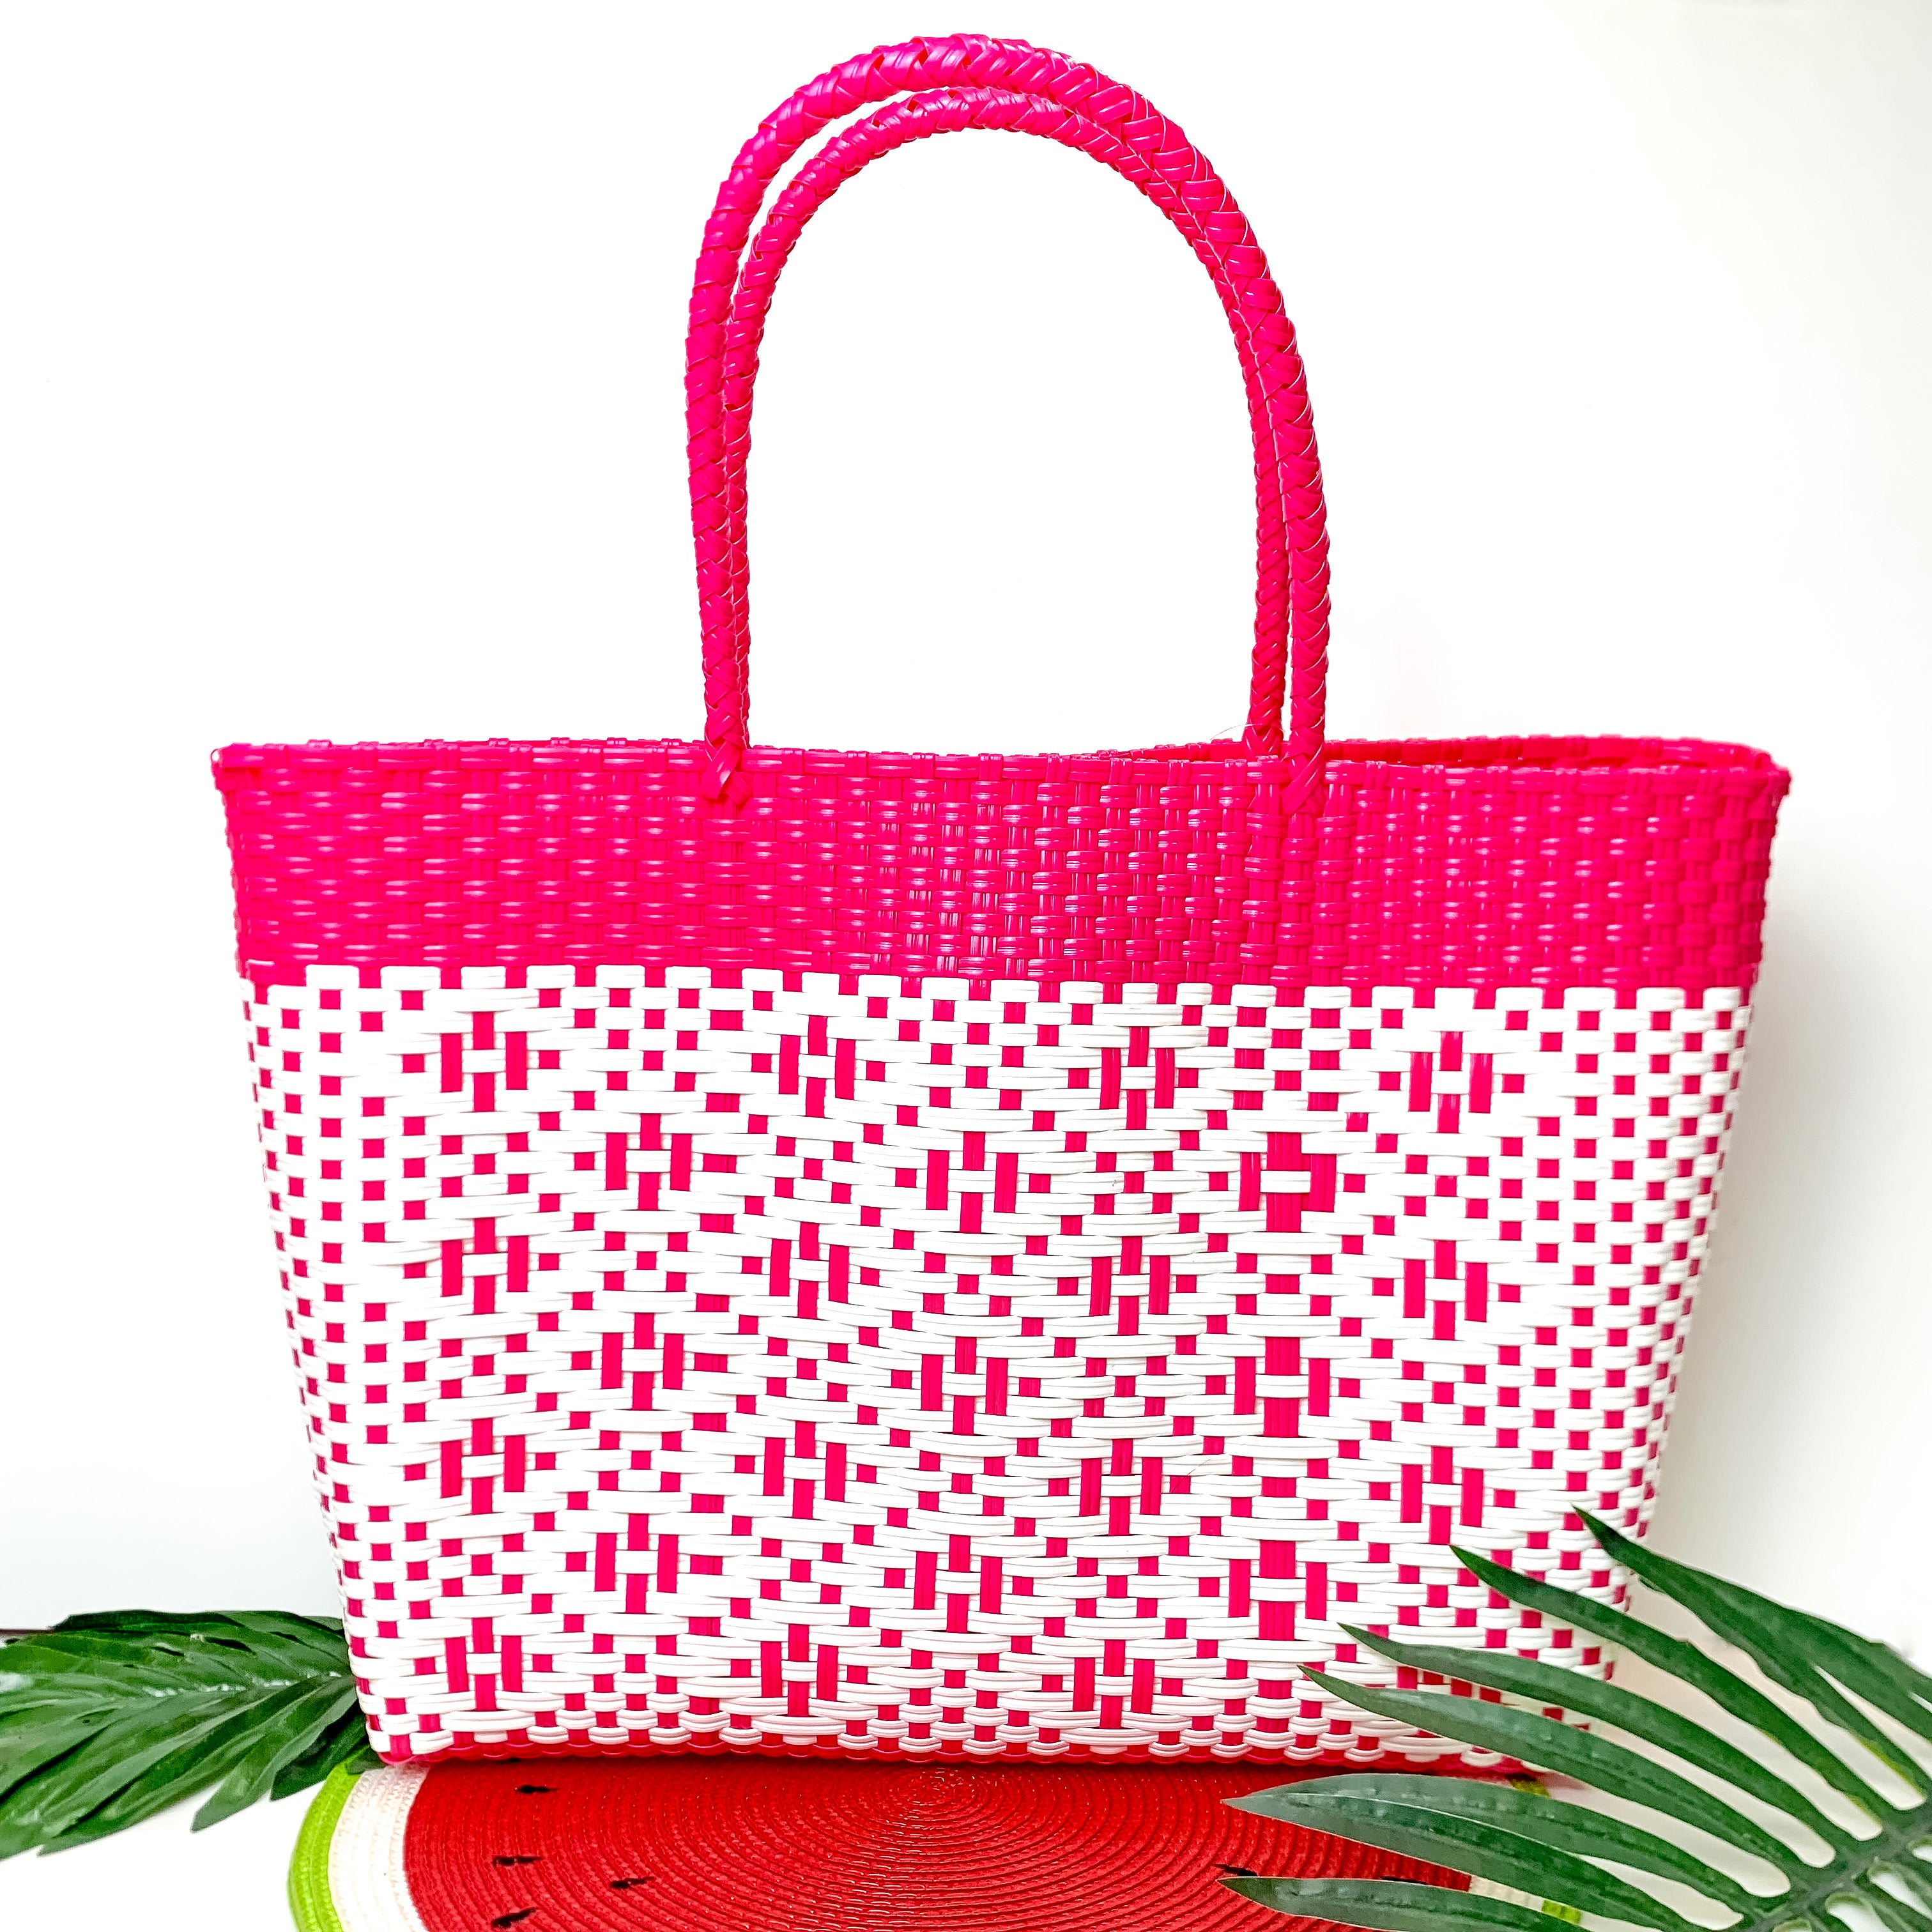 Sonoran Sky Market Tote Bag in Neon Pink and White